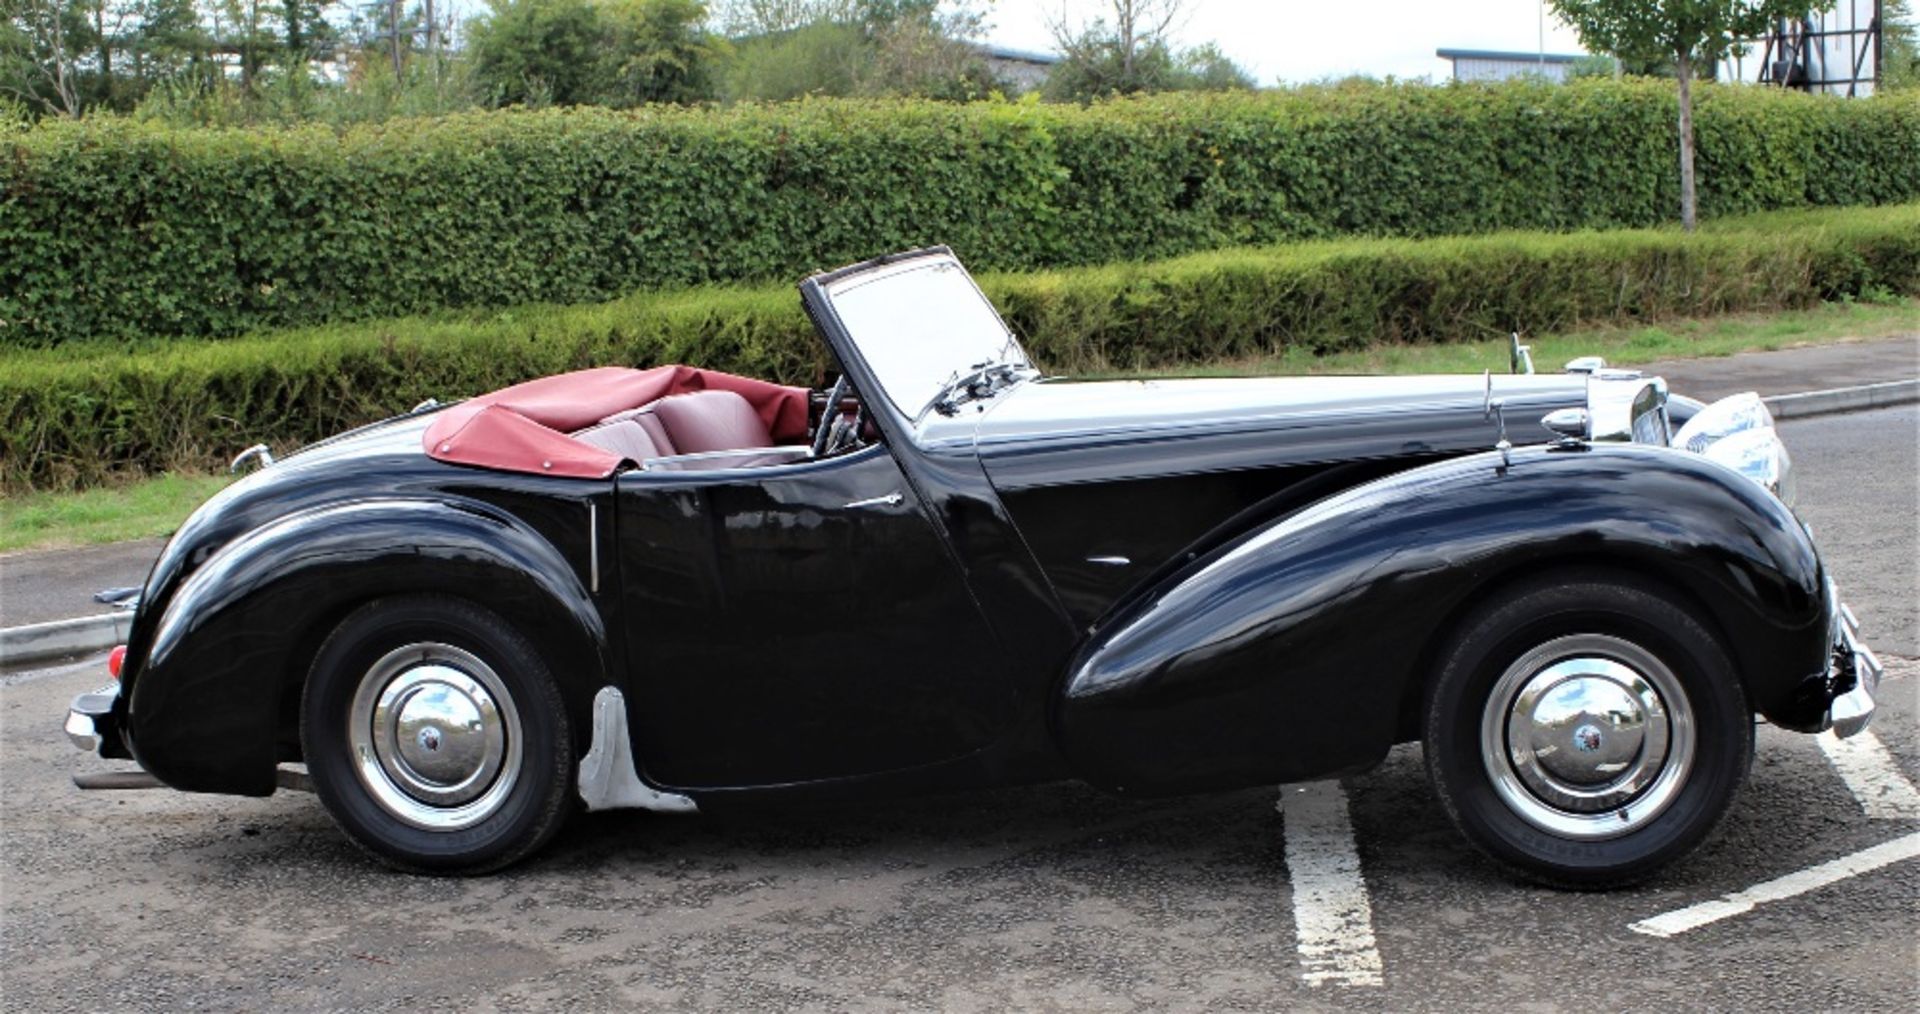 1946 TRIUMPH ROADSTER Registration Number: NJO 765 Chassis Number: TRA 1283 Recorded Mileage: 6, - Image 4 of 15